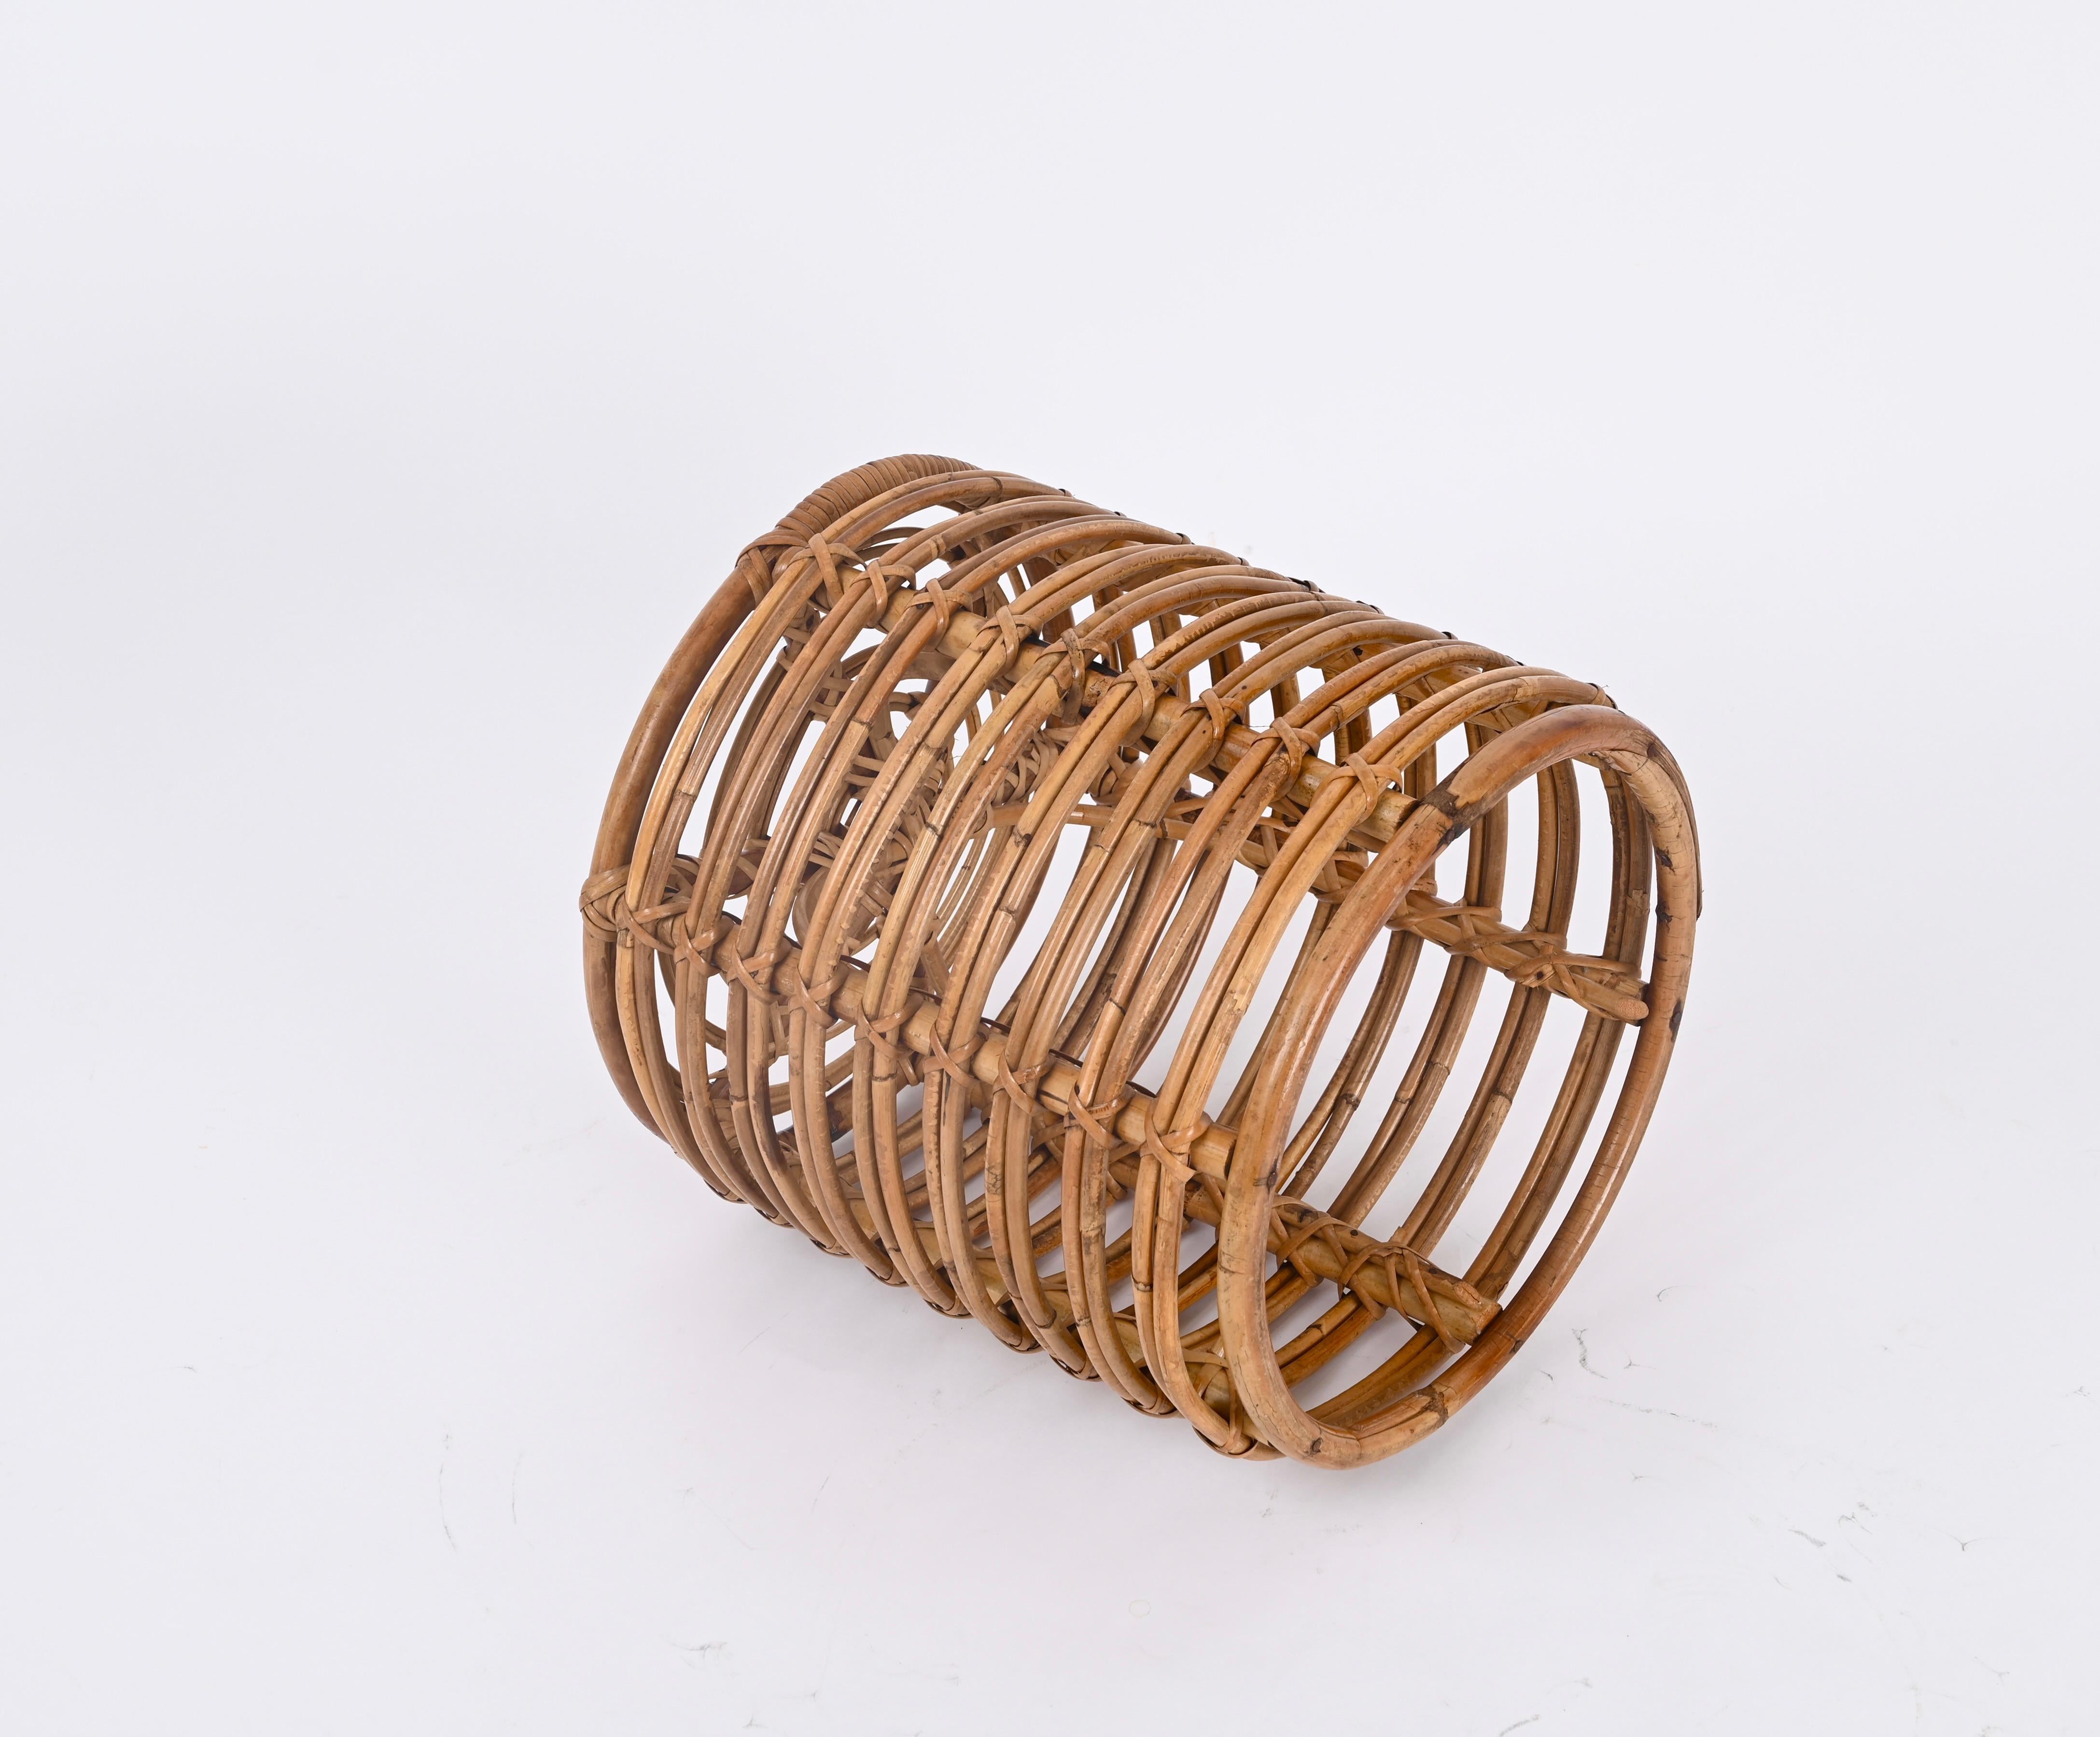 20th Century Midcentury Tito Agnoli Rattan and Wicker Round Pouf Stool, Italy, 1970s For Sale